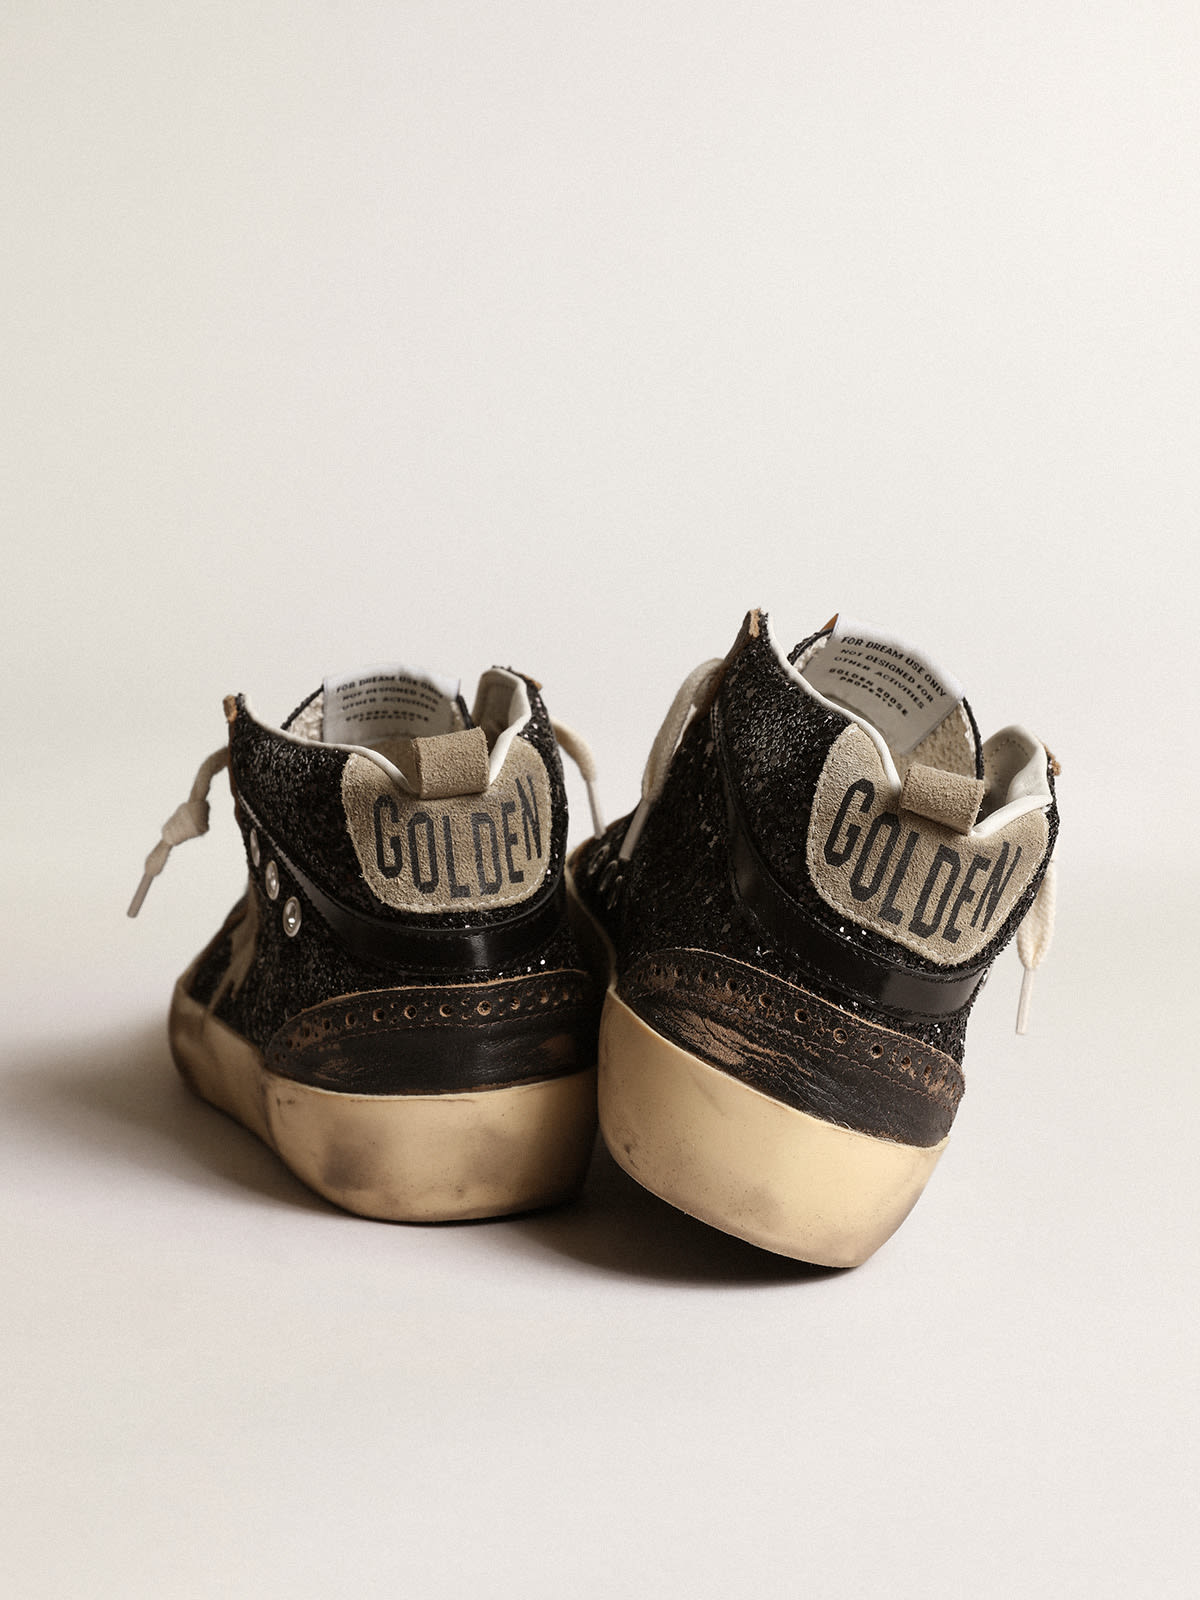 Golden Goose - Mid Star in black glitter with dove-gray suede star and heel tab in 